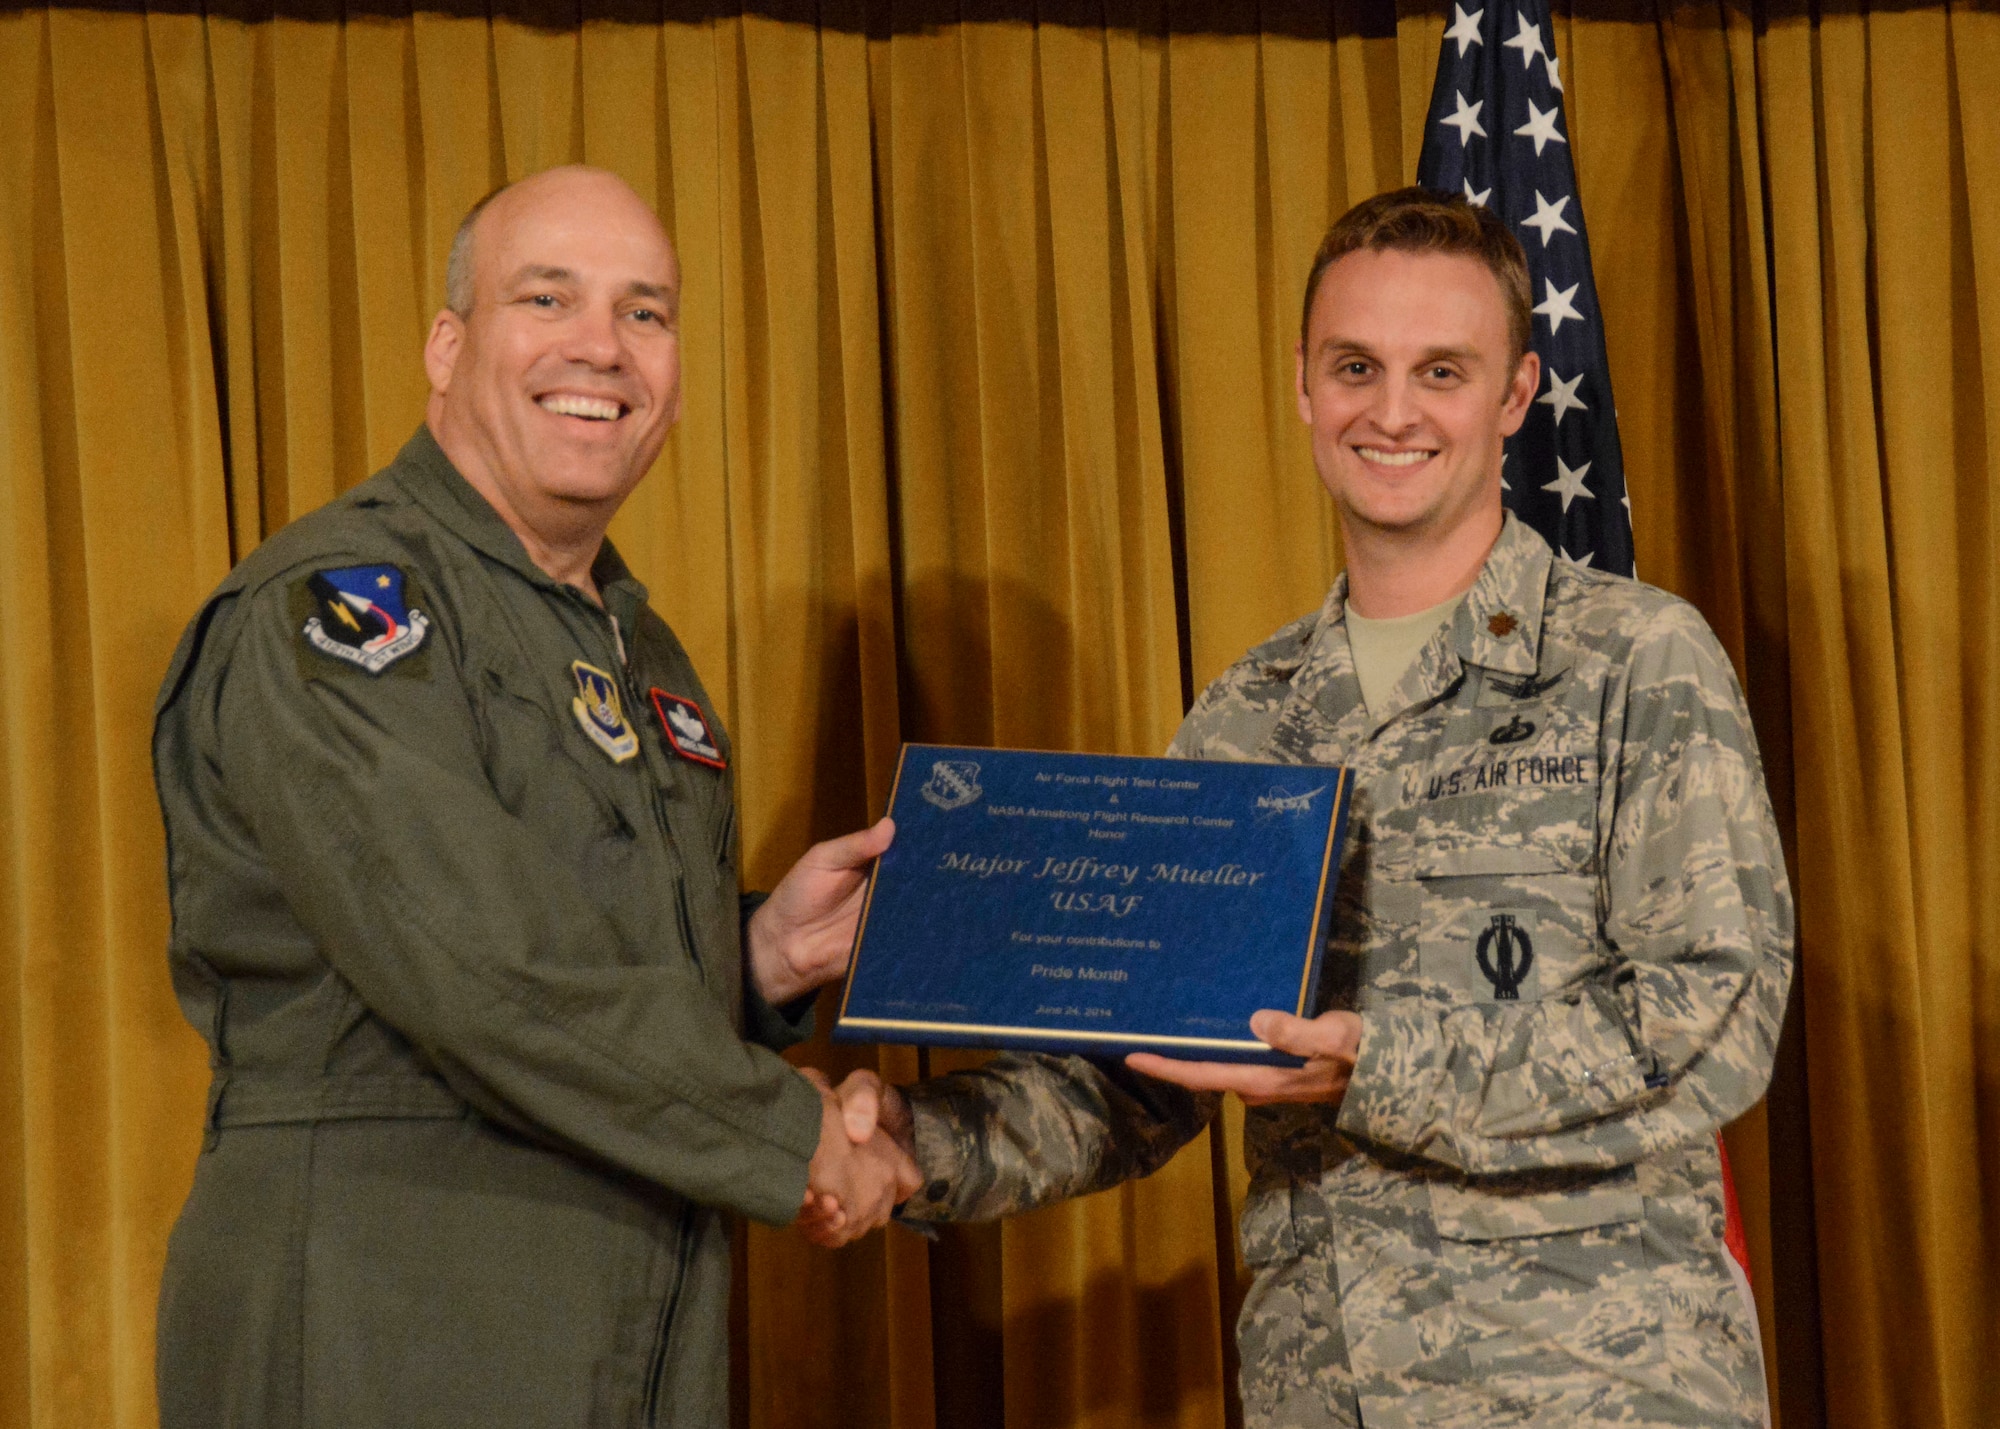 Brig. Gen. Michael Brewer (left), 412th Test Wing commander, presents Maj. Jeffrey Mueller with a plaque from the 412th Test Wing and NASA Armstrong Flight Research Center for his contributions to the LGBT Pride Month luncheon June 26. (U.S. Air Force photo by Rebecca Amber)